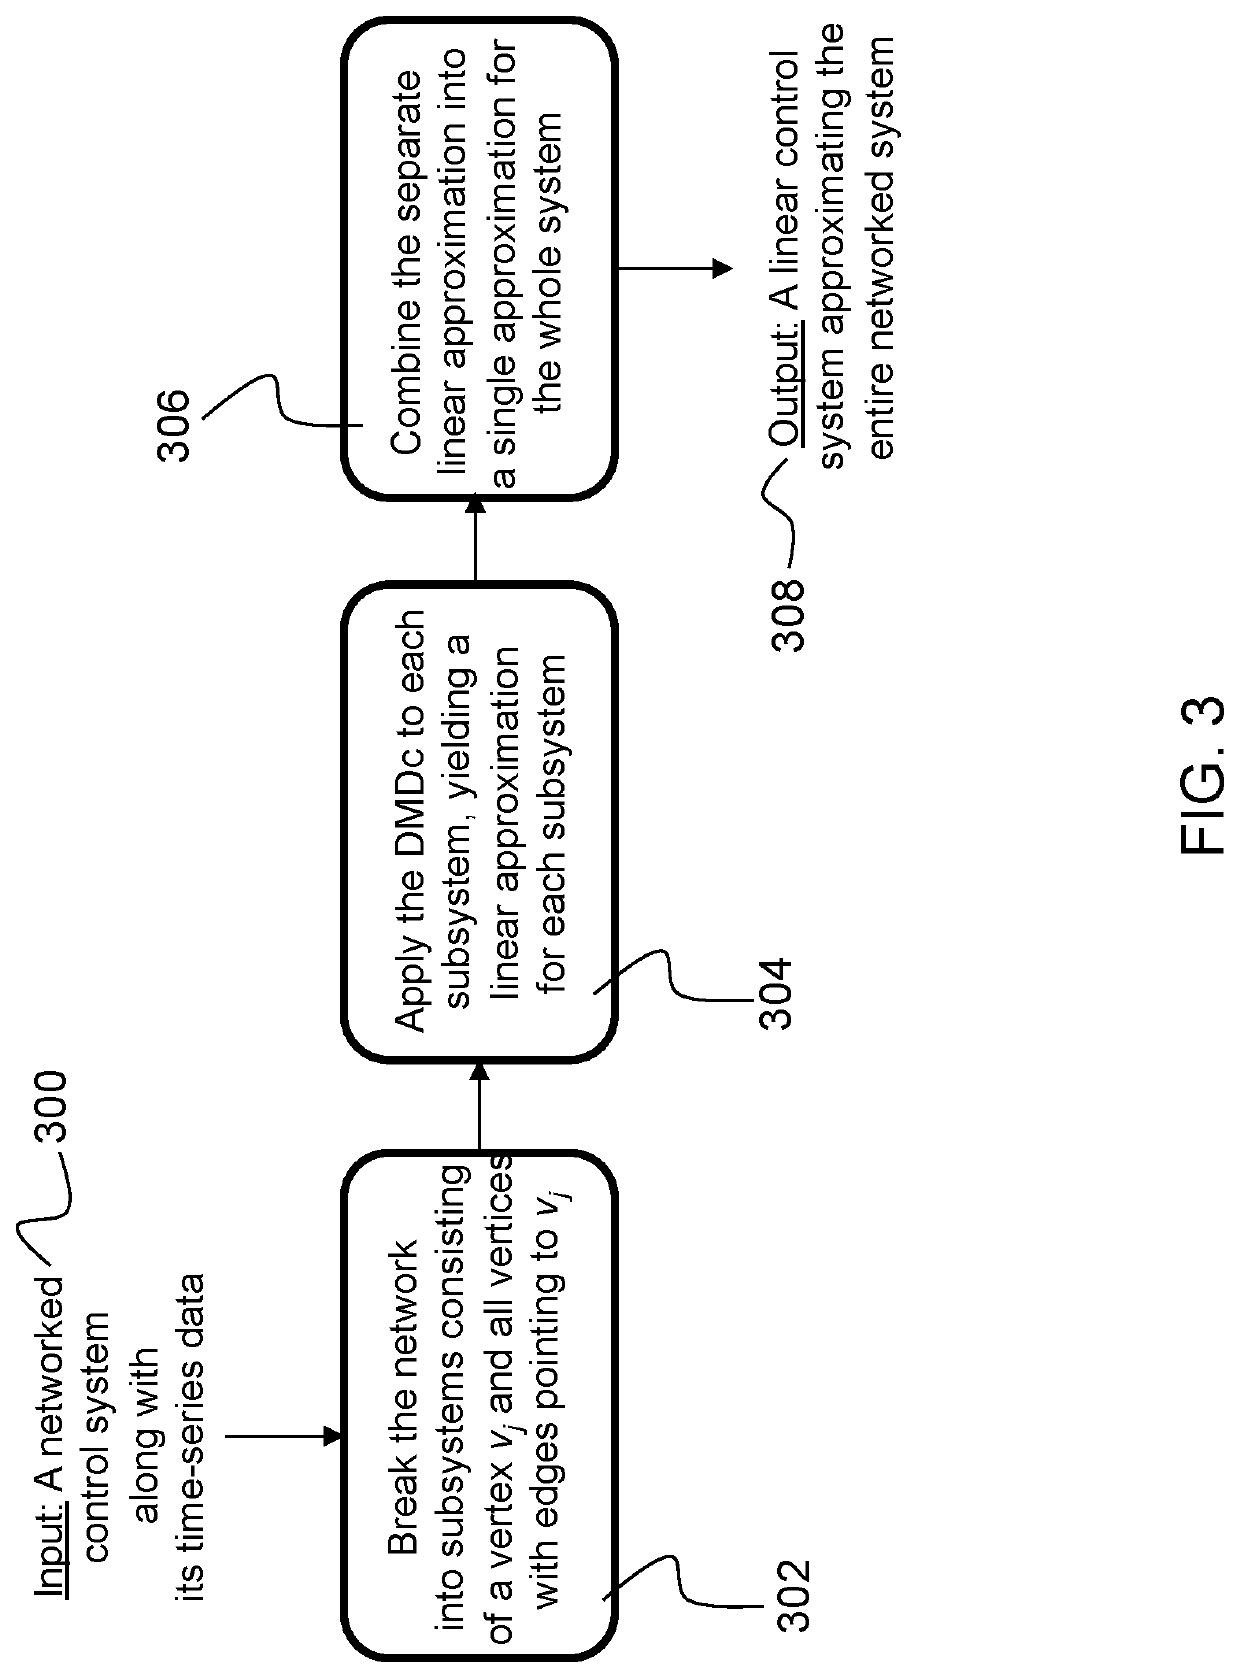 Process to control a networked system of time varying devices